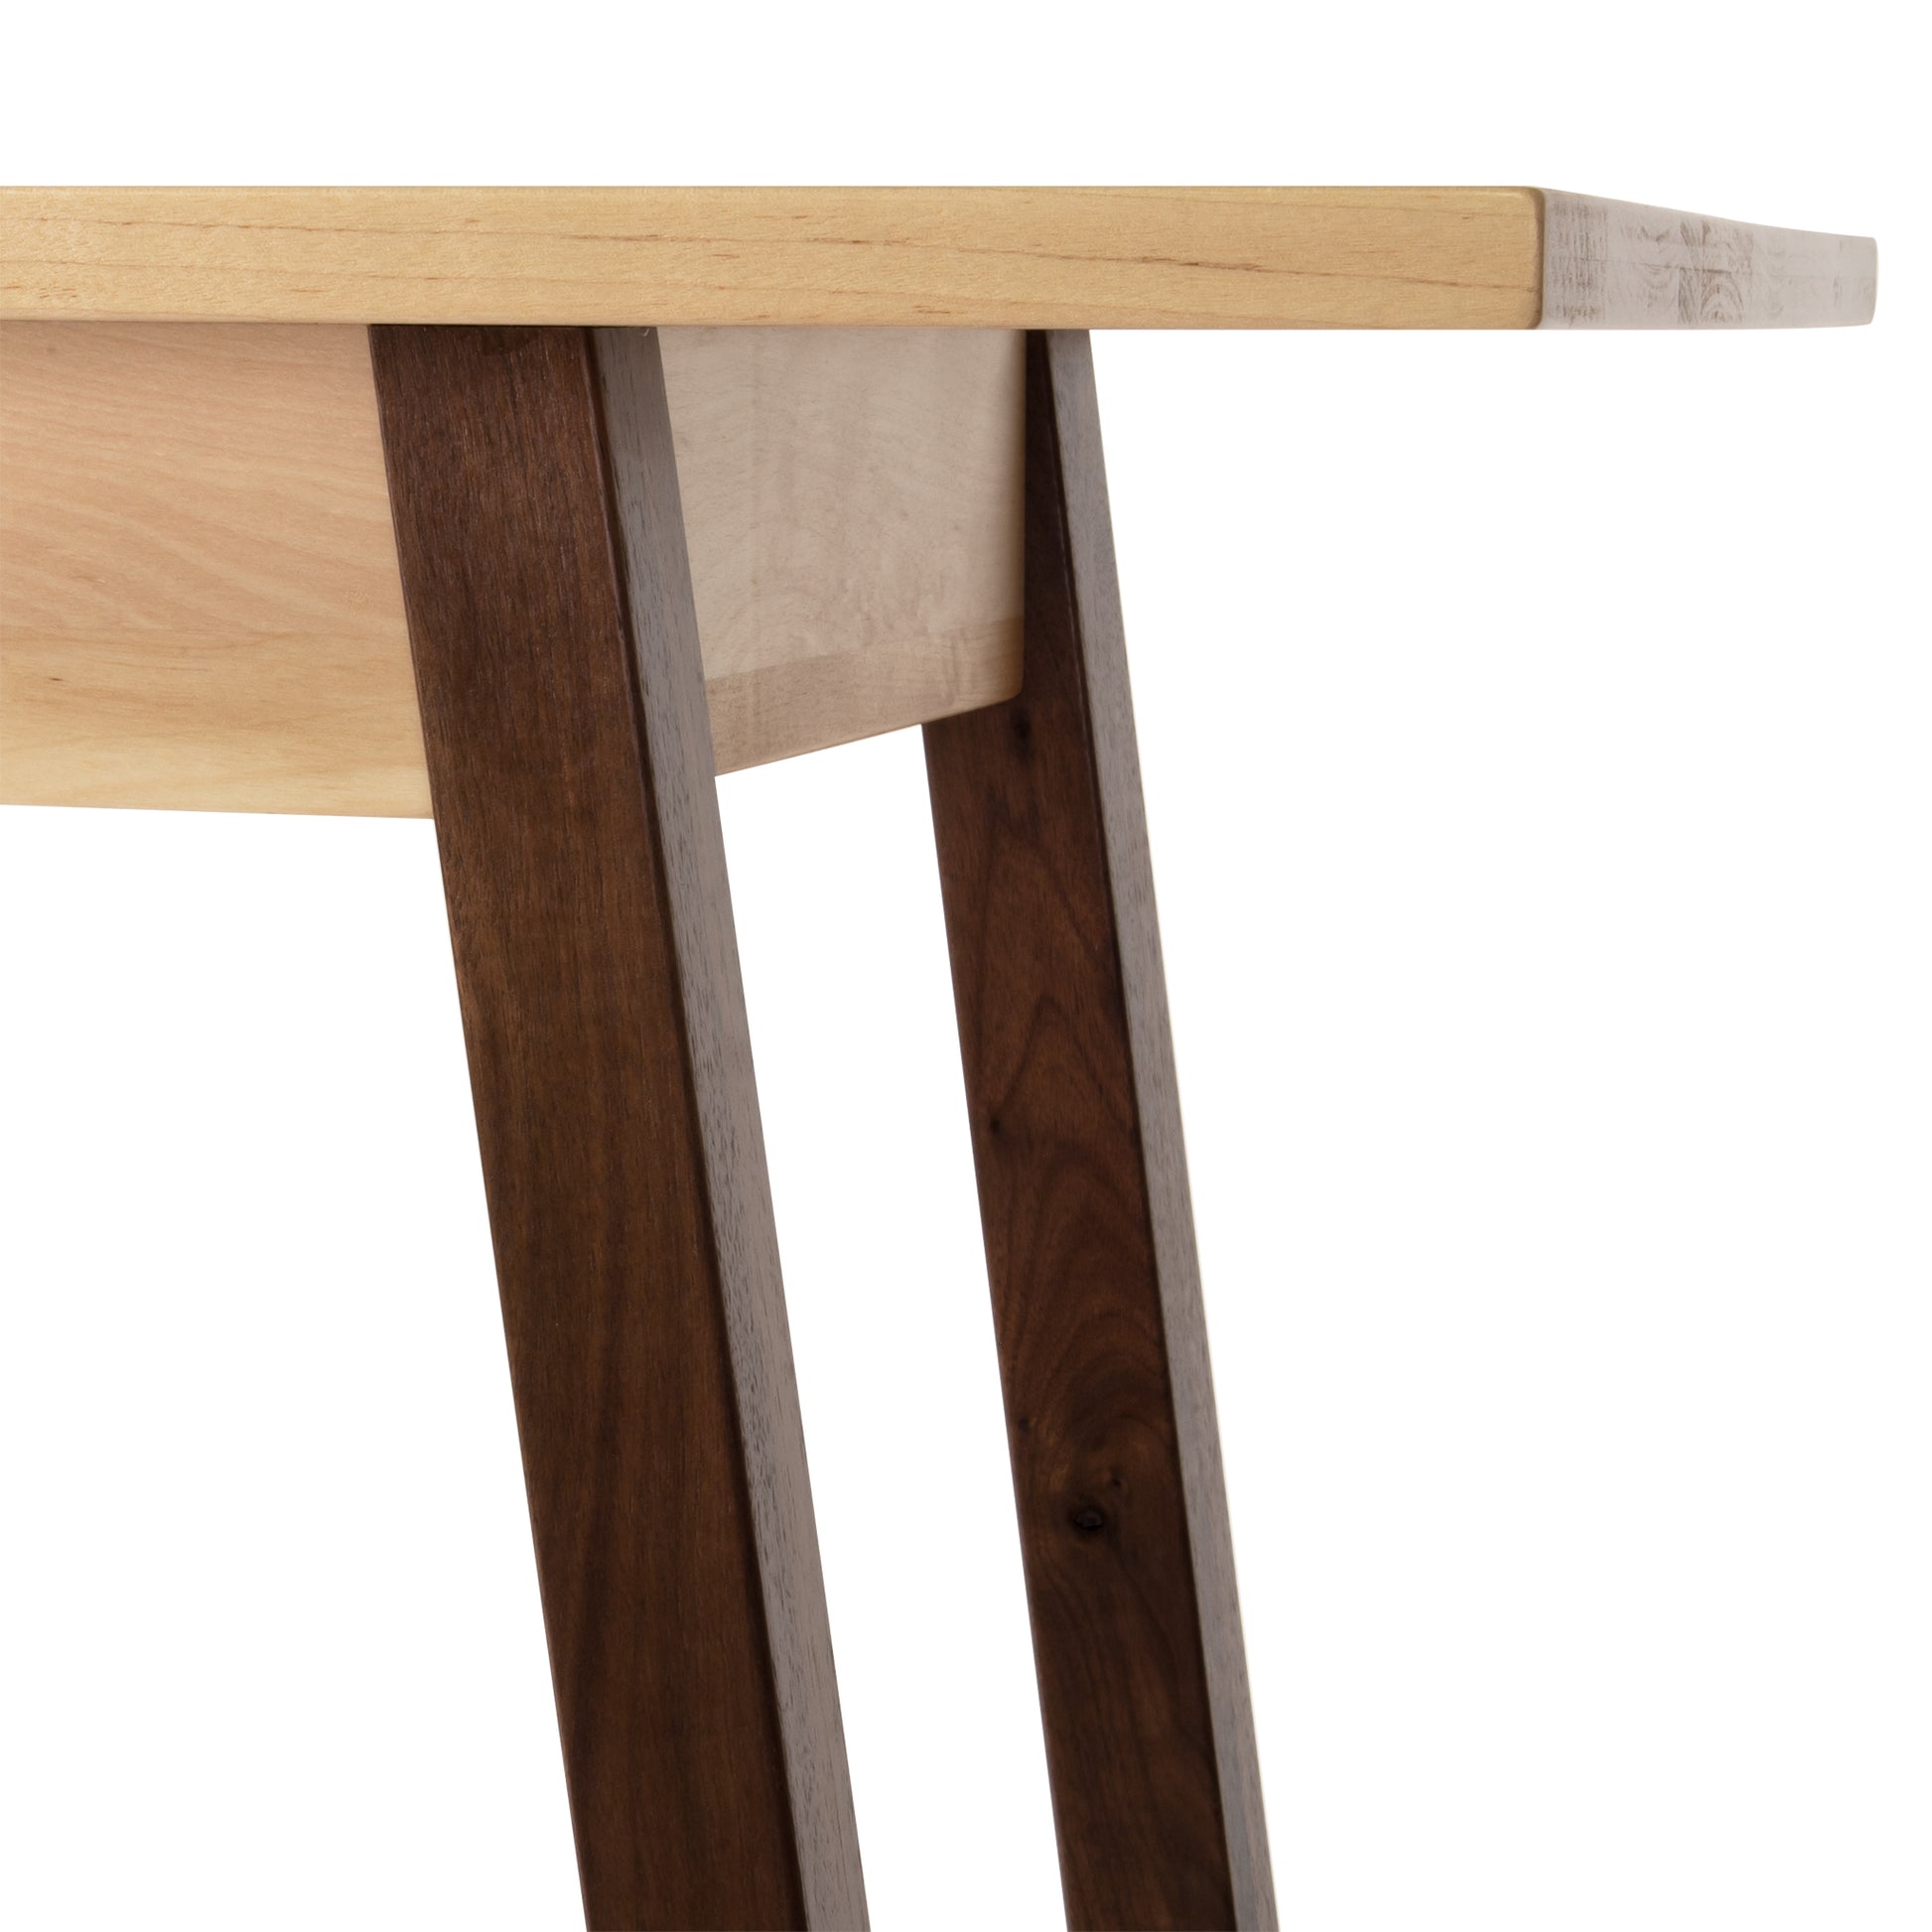 A table with a wooden top and wooden legs.